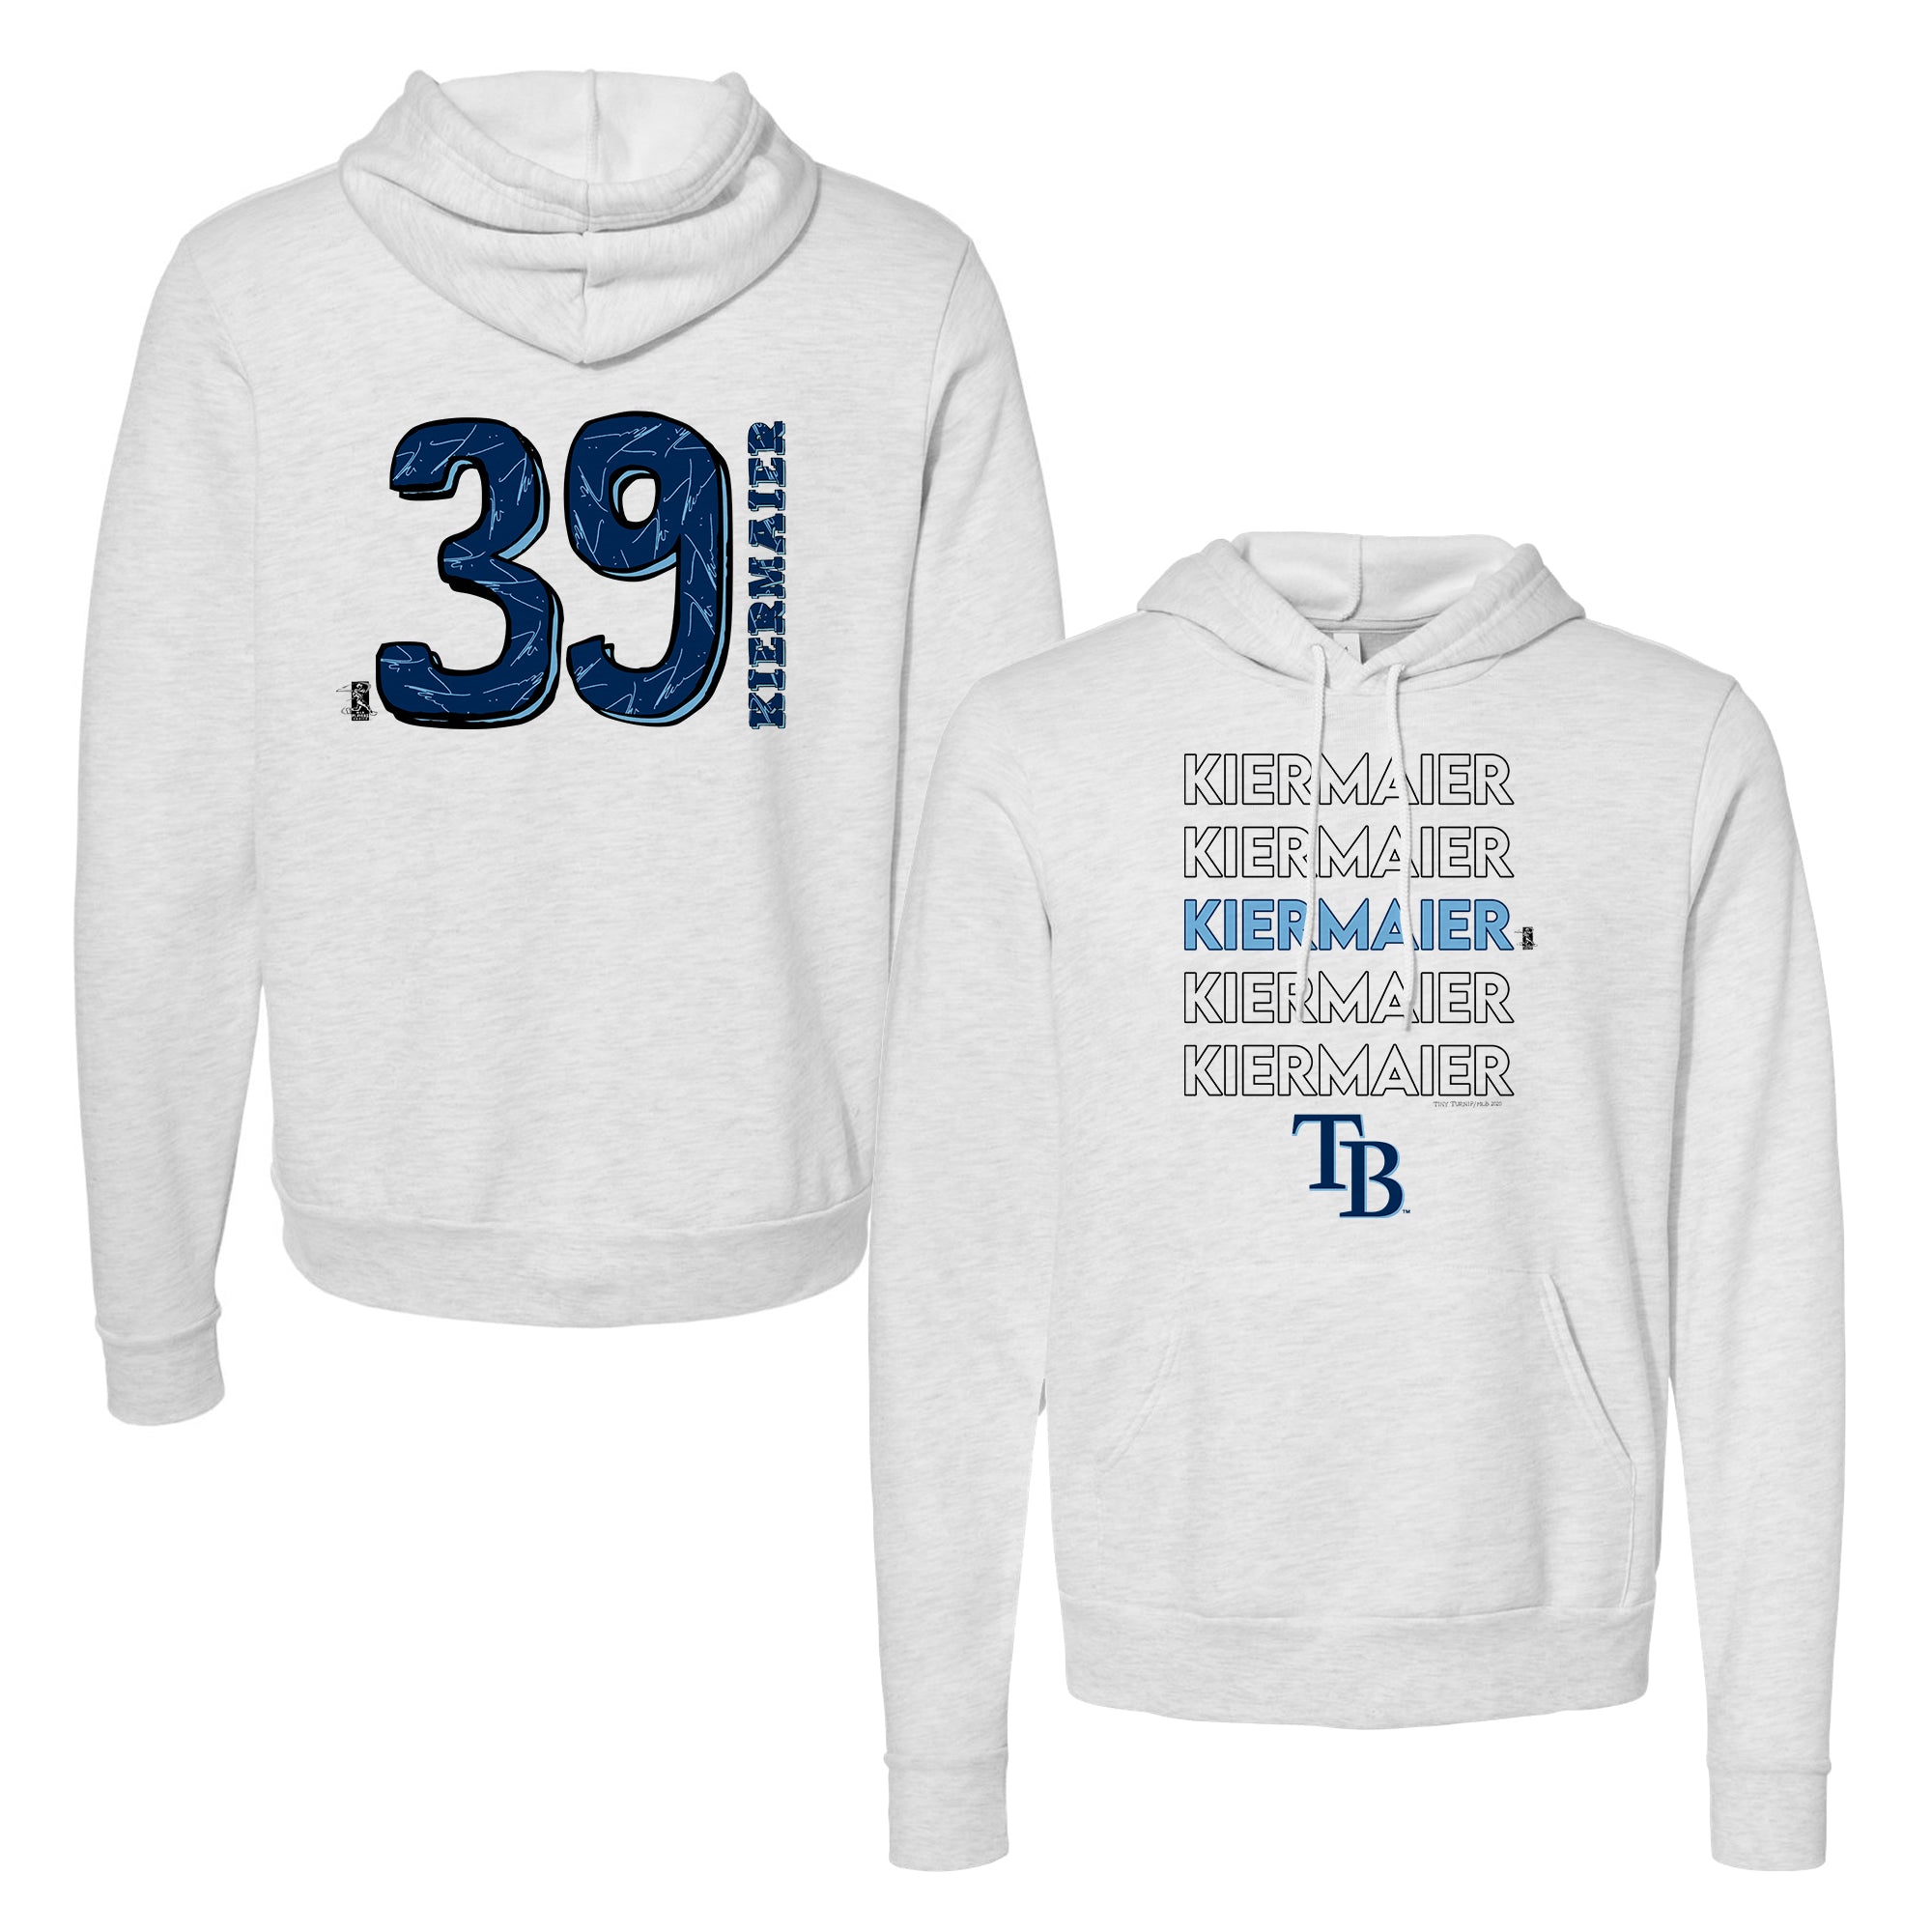 Official tampa bay rays baseball home sweet home T-shirts, hoodie